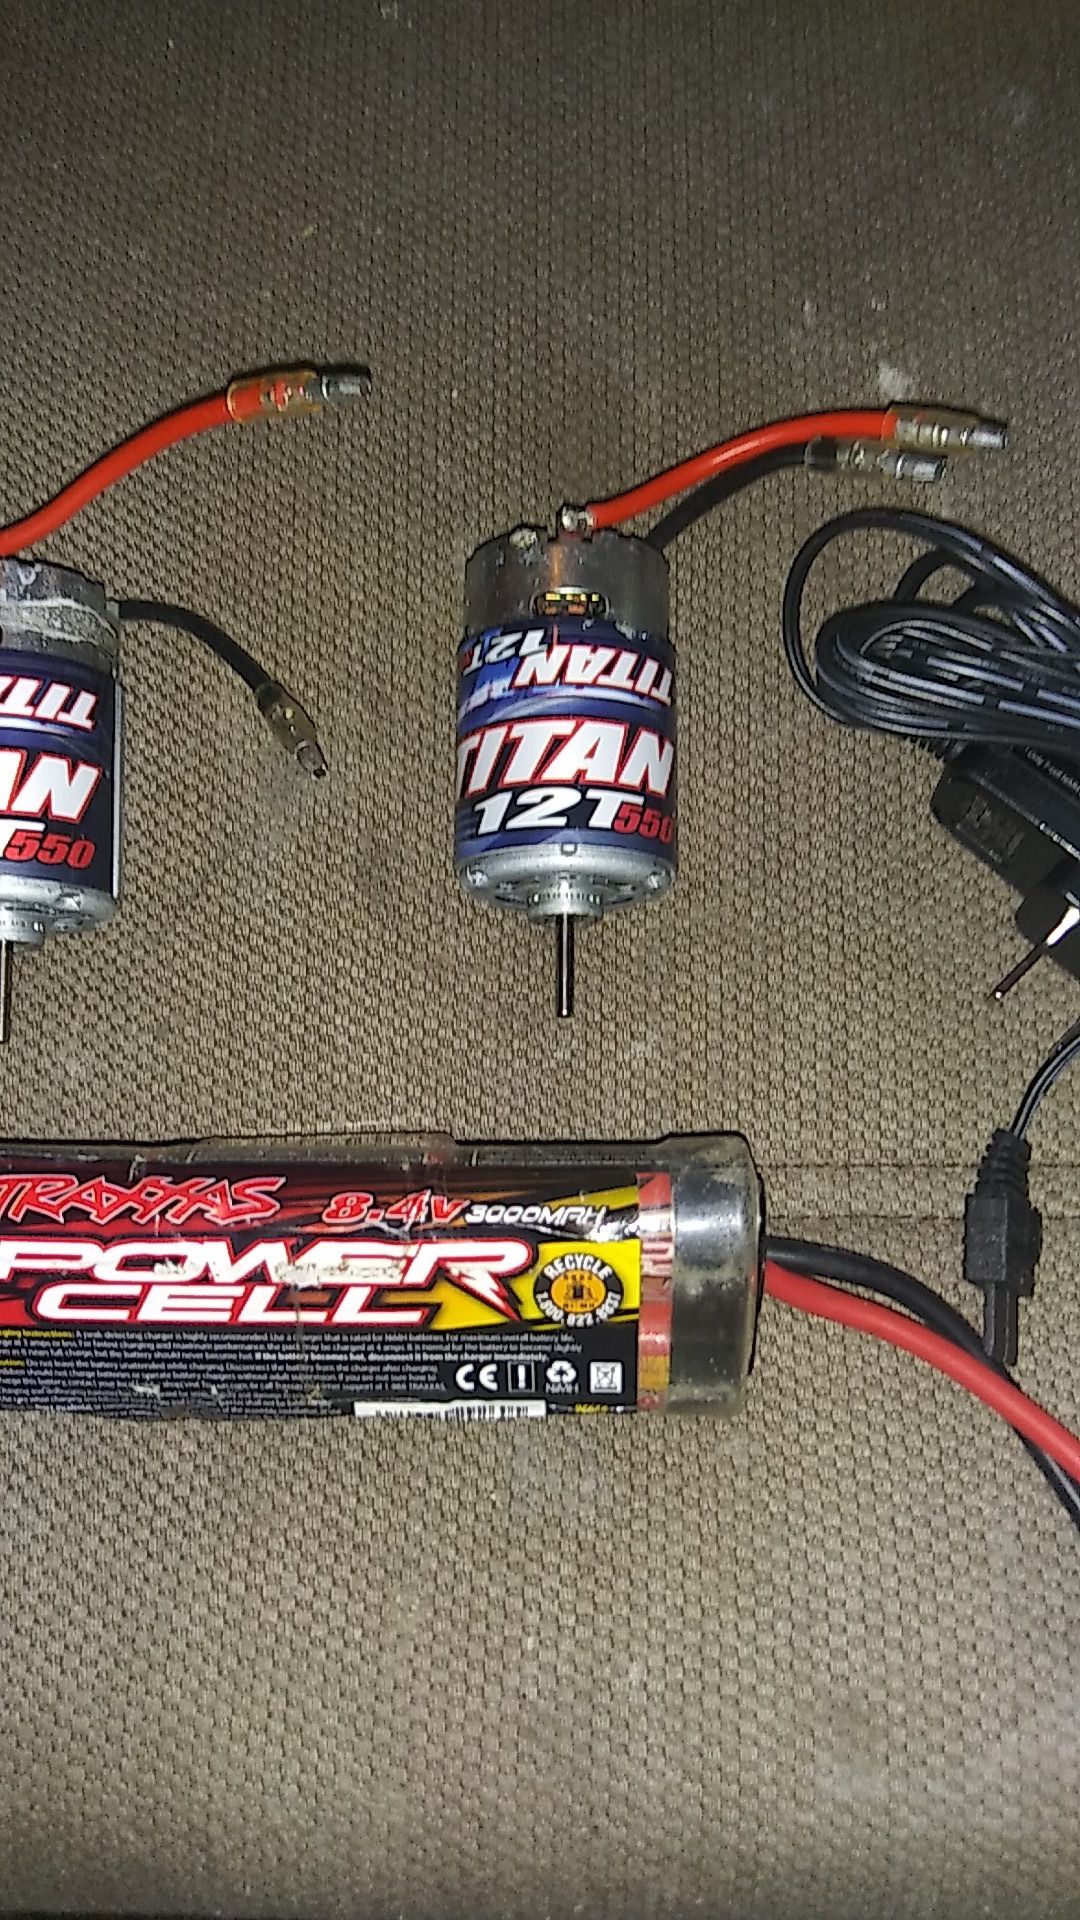 2 Traxxas titan 12t 550 motors, and a Traxxas 8.4v 3000max battery with charger.